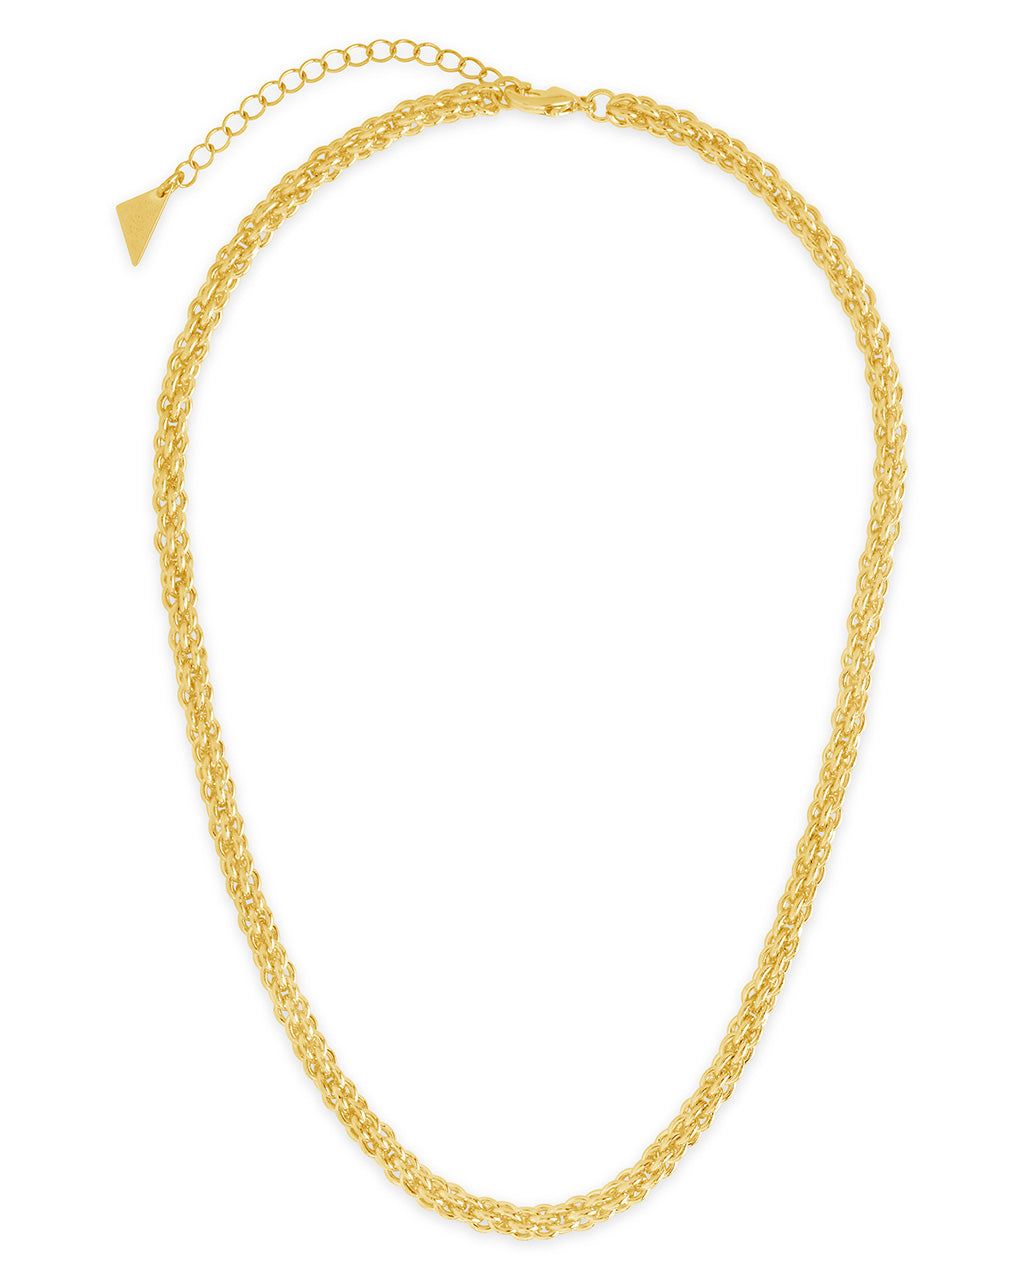 Yara Chain Necklace Sterling Forever Gold 